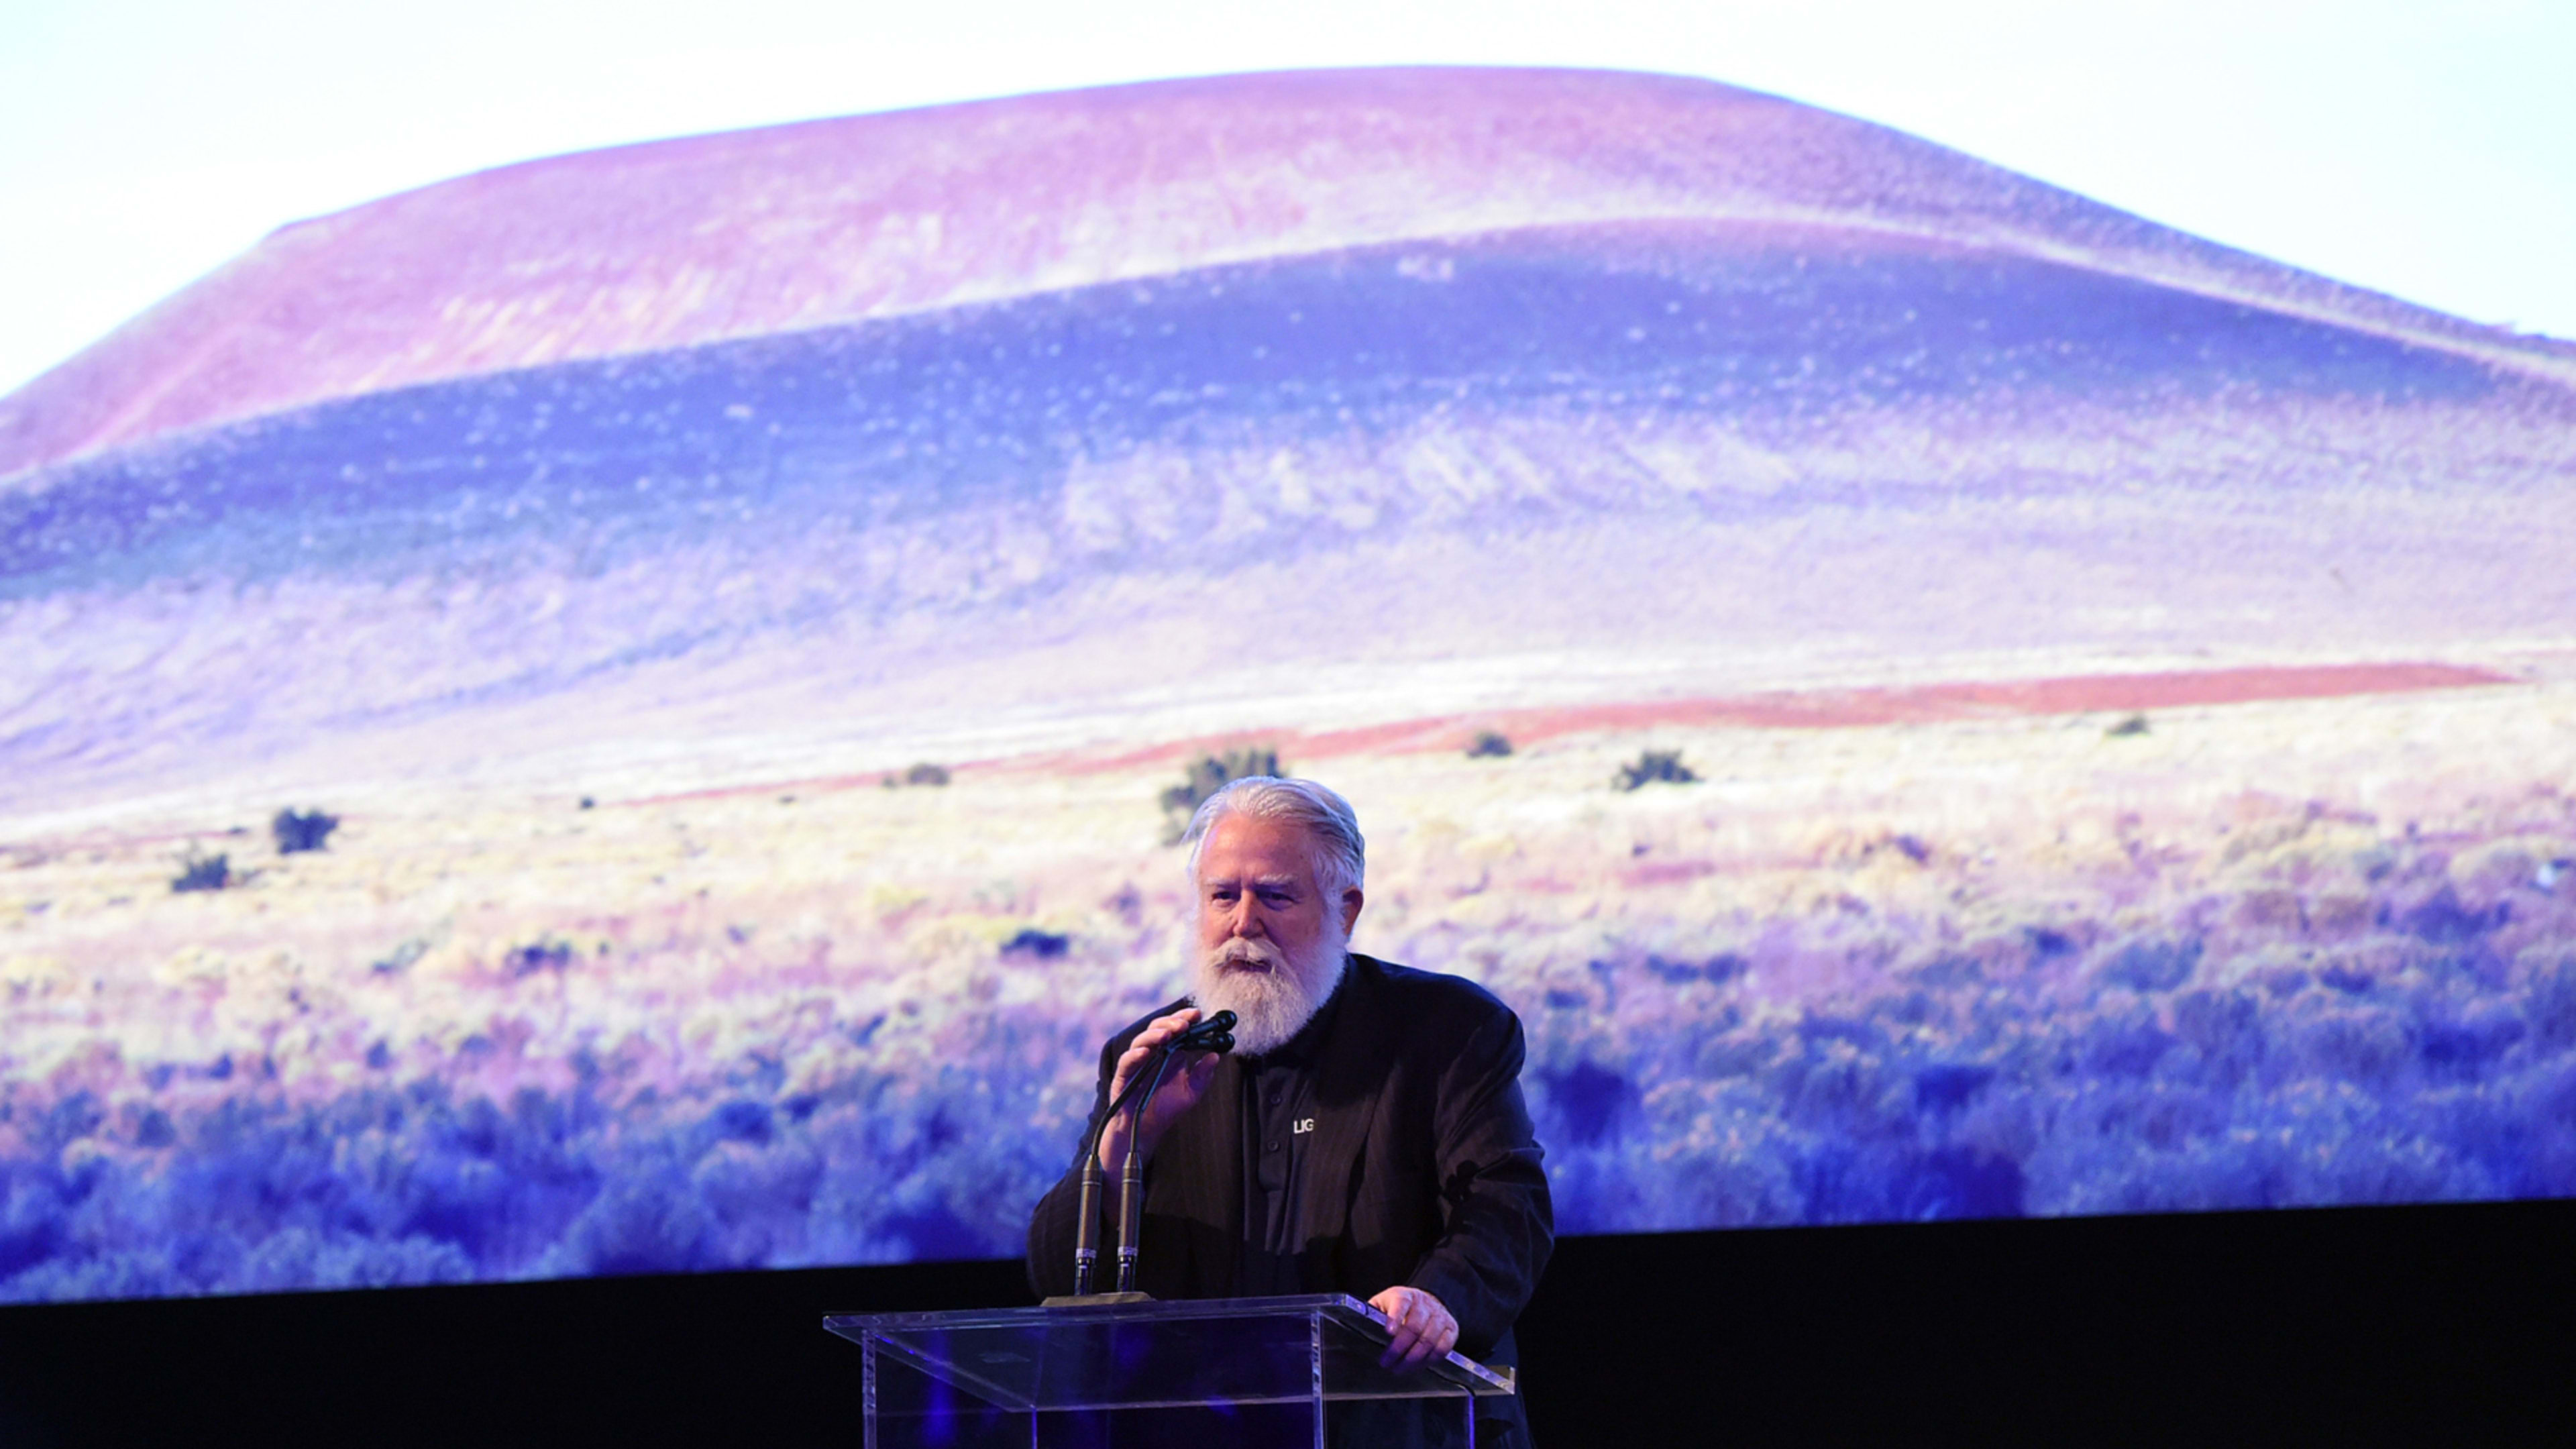 James Turrell’s most ambitious work is set to open after 45 years